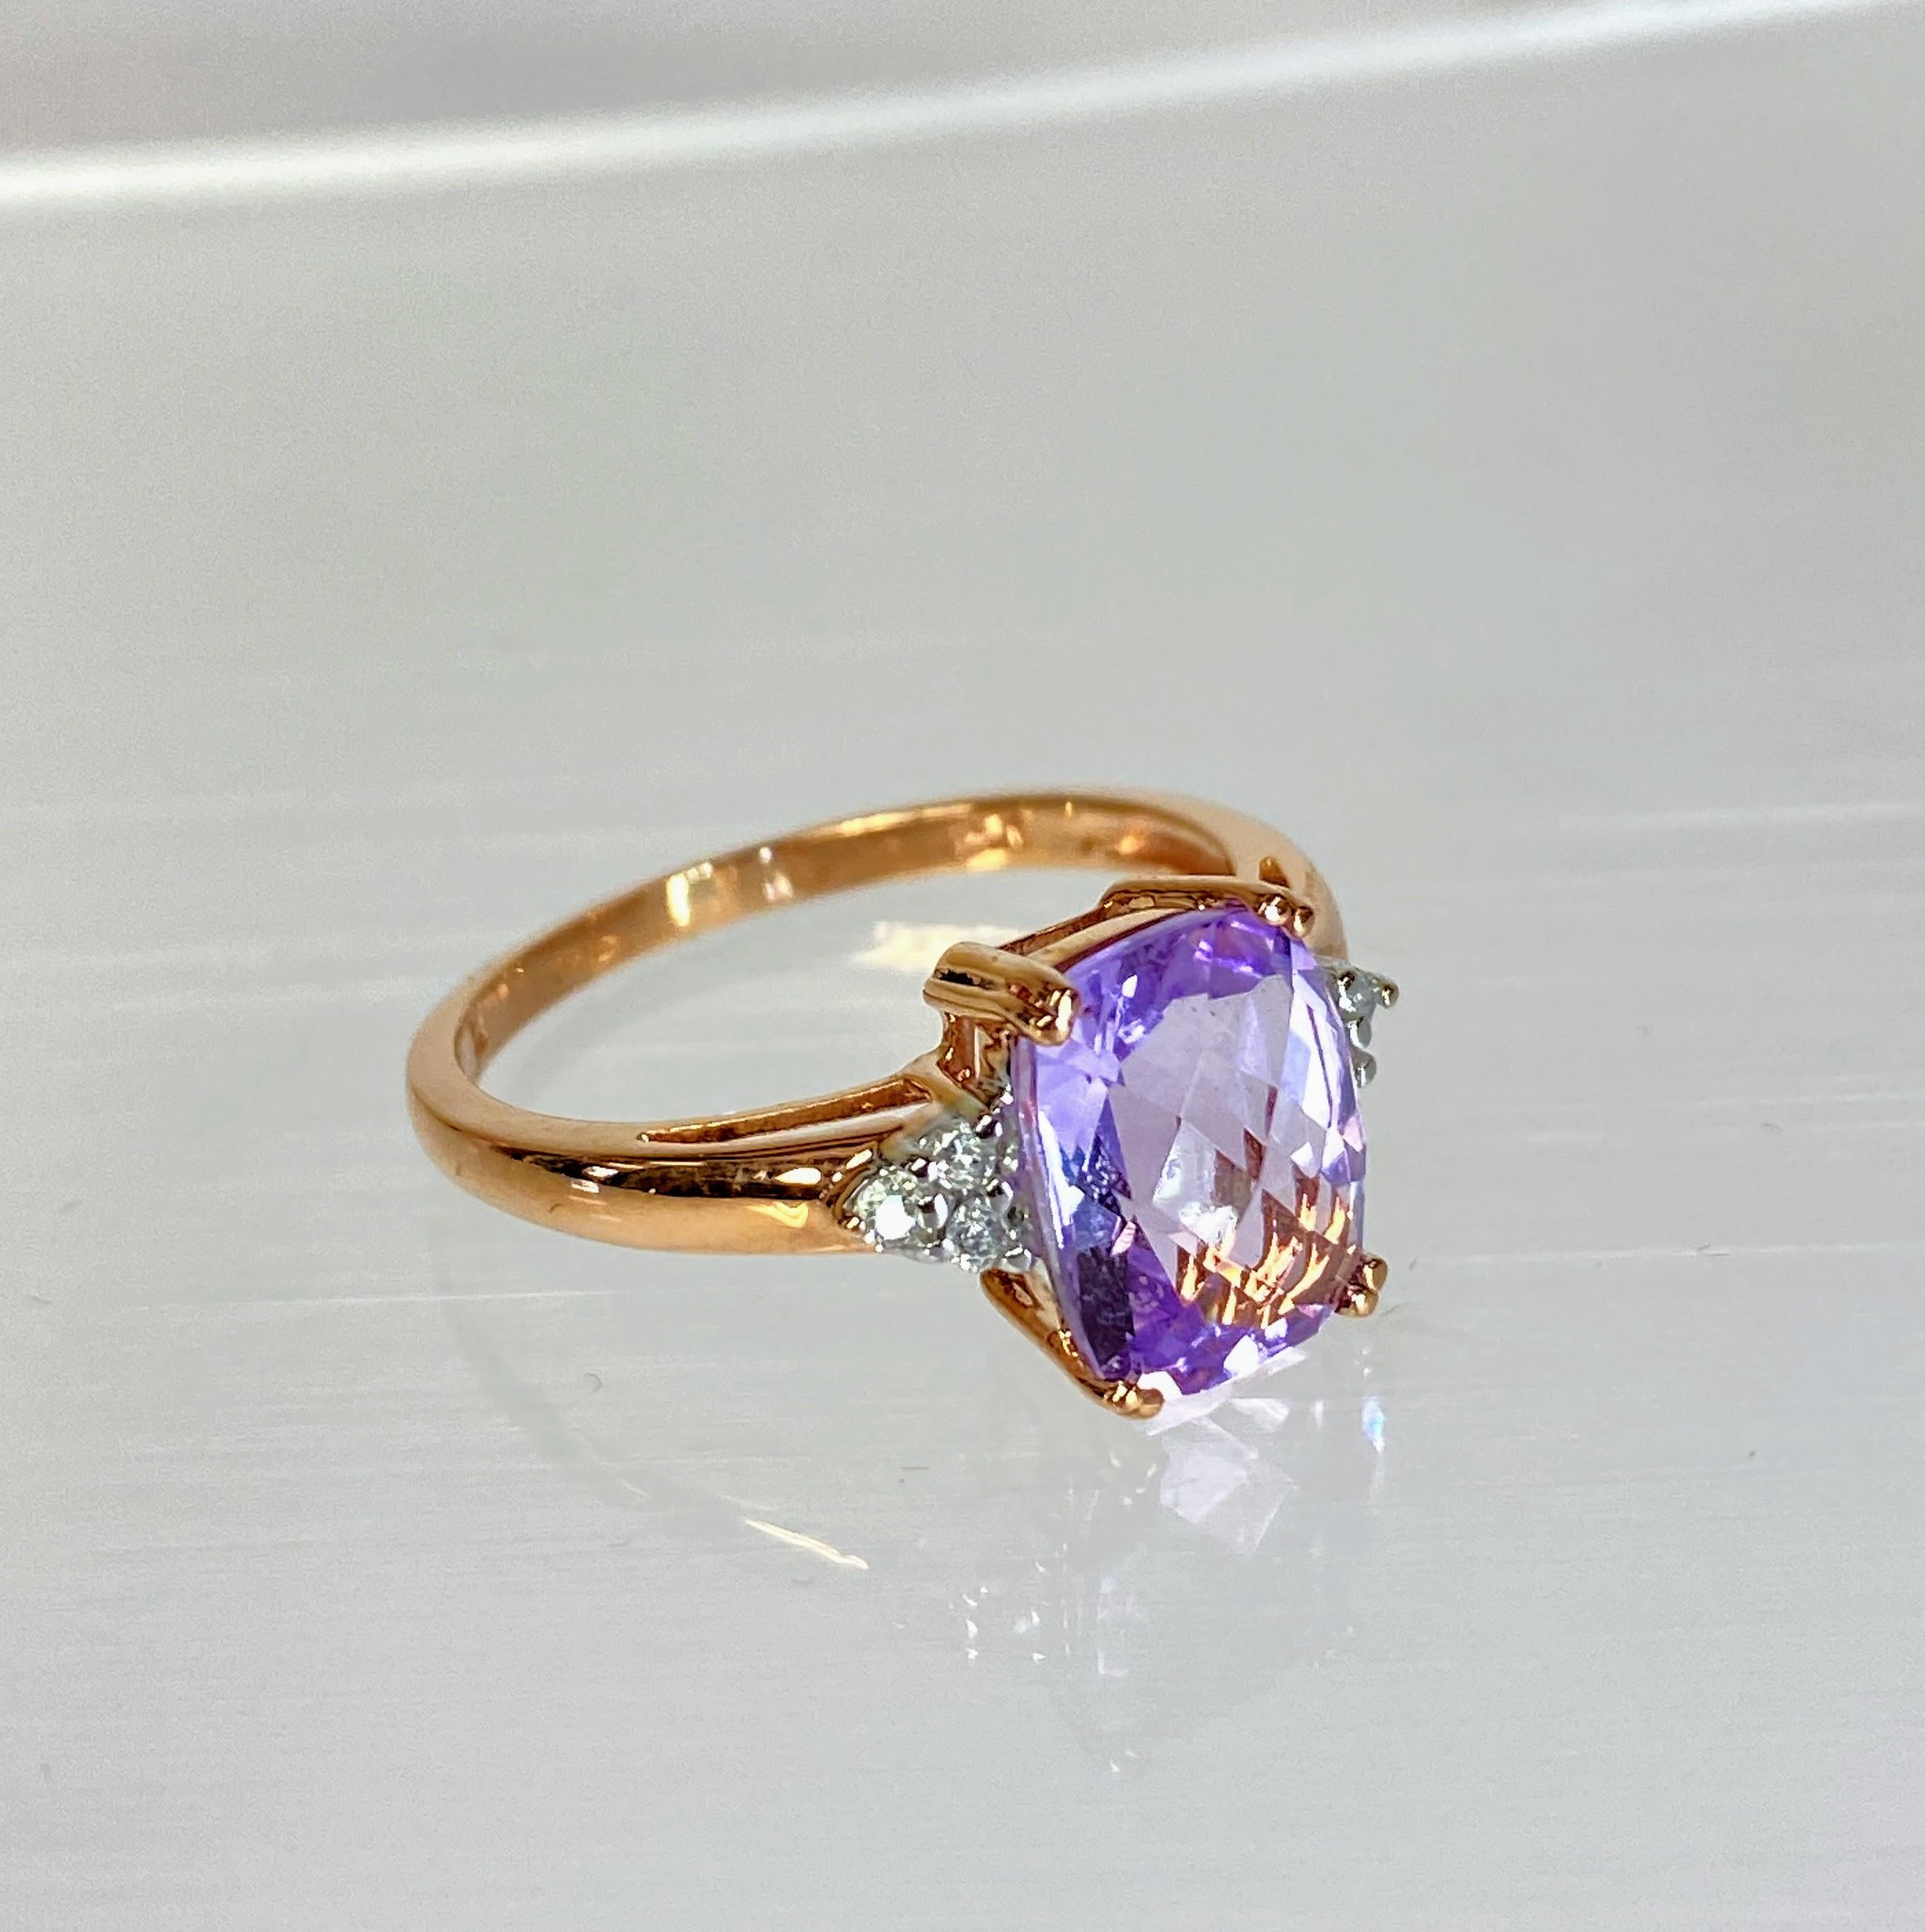 Captivating 14K Rose Gold Cushion Cut Purple Amethyst Diamond Accent Ring Size 9

This rose gold cushion cut amethyst and diamond ring is a stunning piece of jewelry. The centerpiece of the ring is a cushion-cut amethyst gemstone, known for its